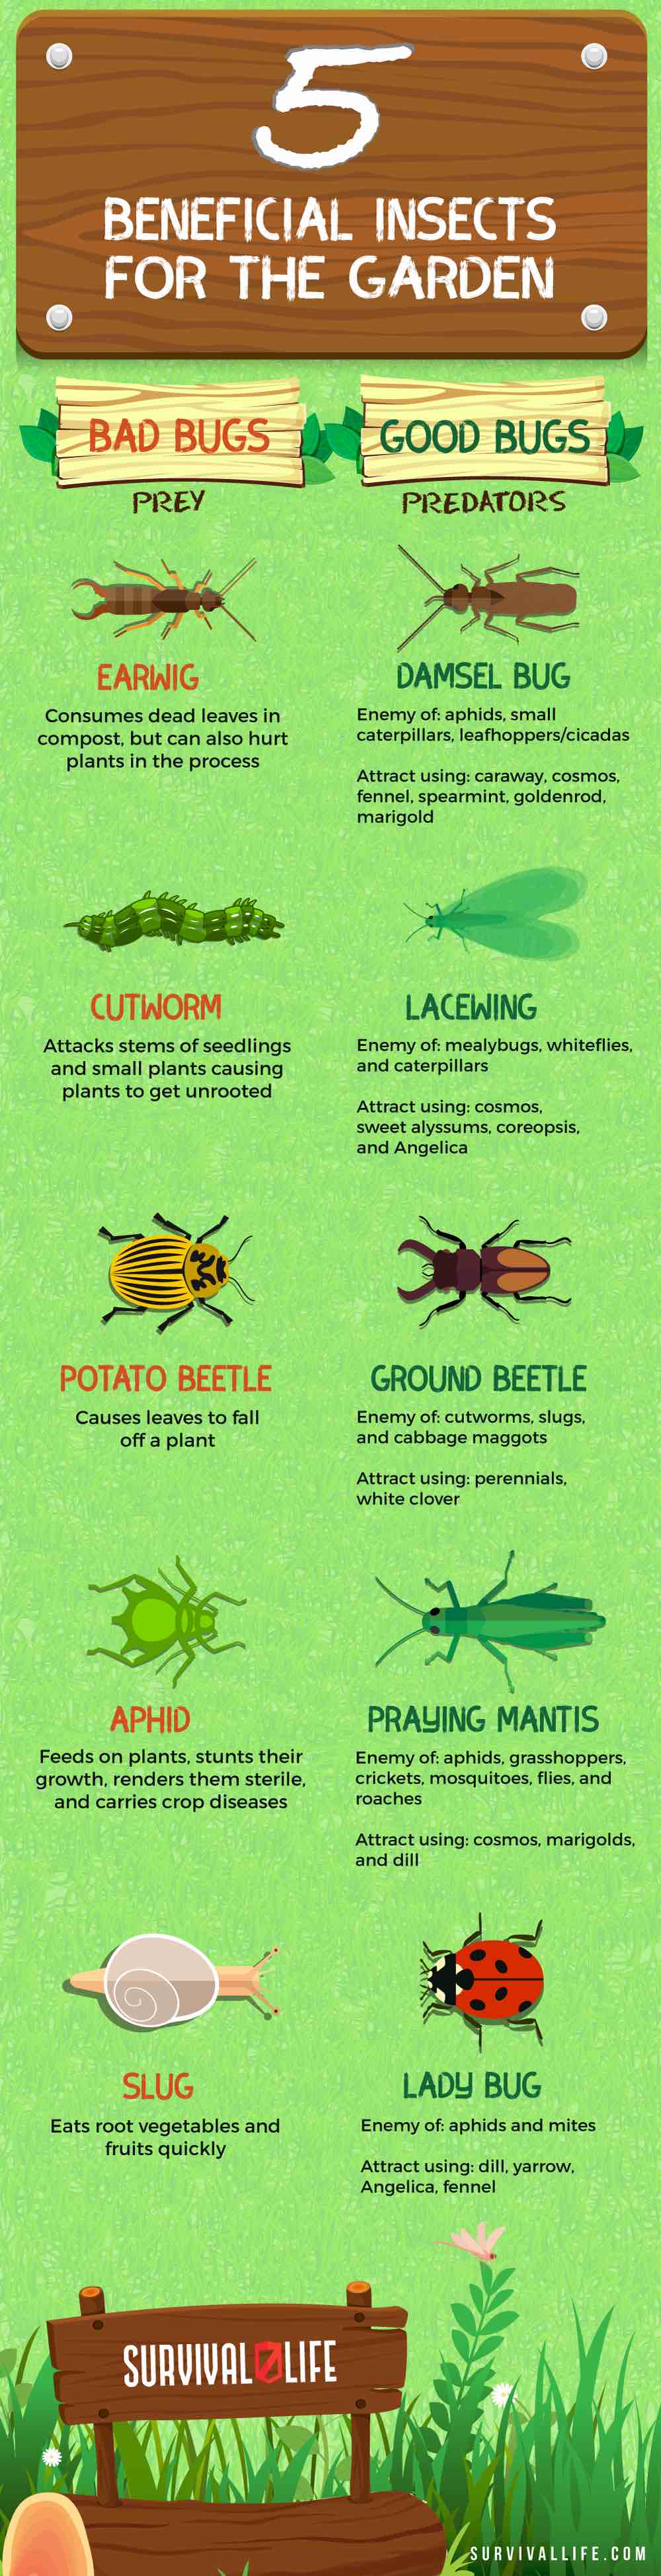 Beneficial Insects For The Garden: Good Bugs Vs. Bad Bugs